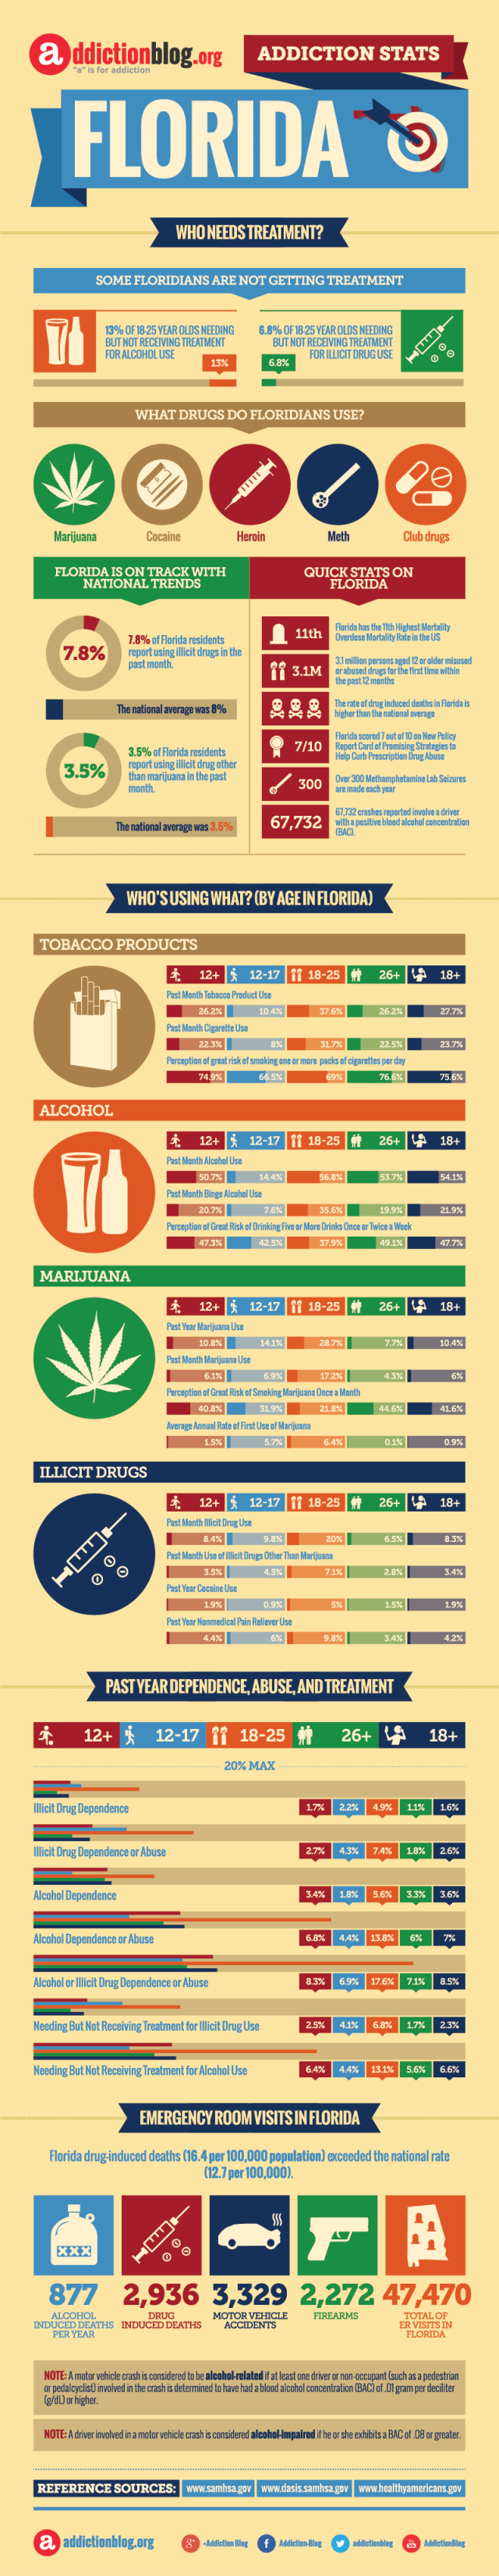 Who needs substance abuse treatment in Florida? (INFOGRAPHIC)